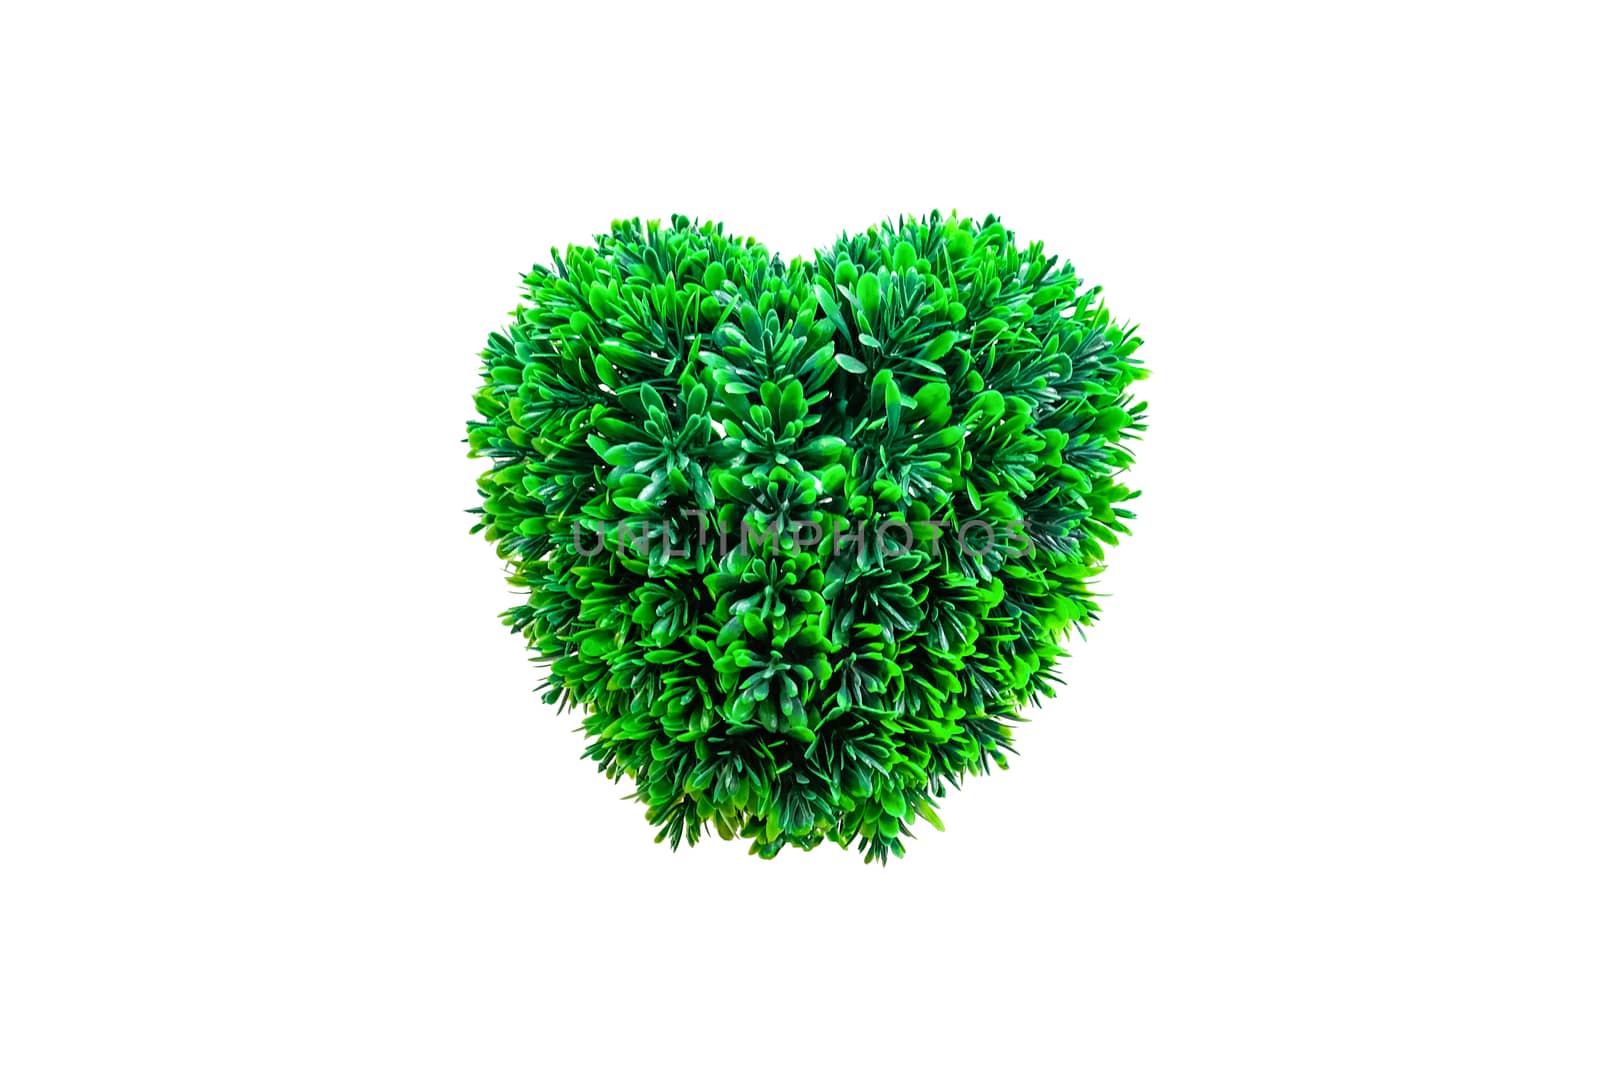 a brightly green color heart made of plastic leaves, isolated on white background with copy space